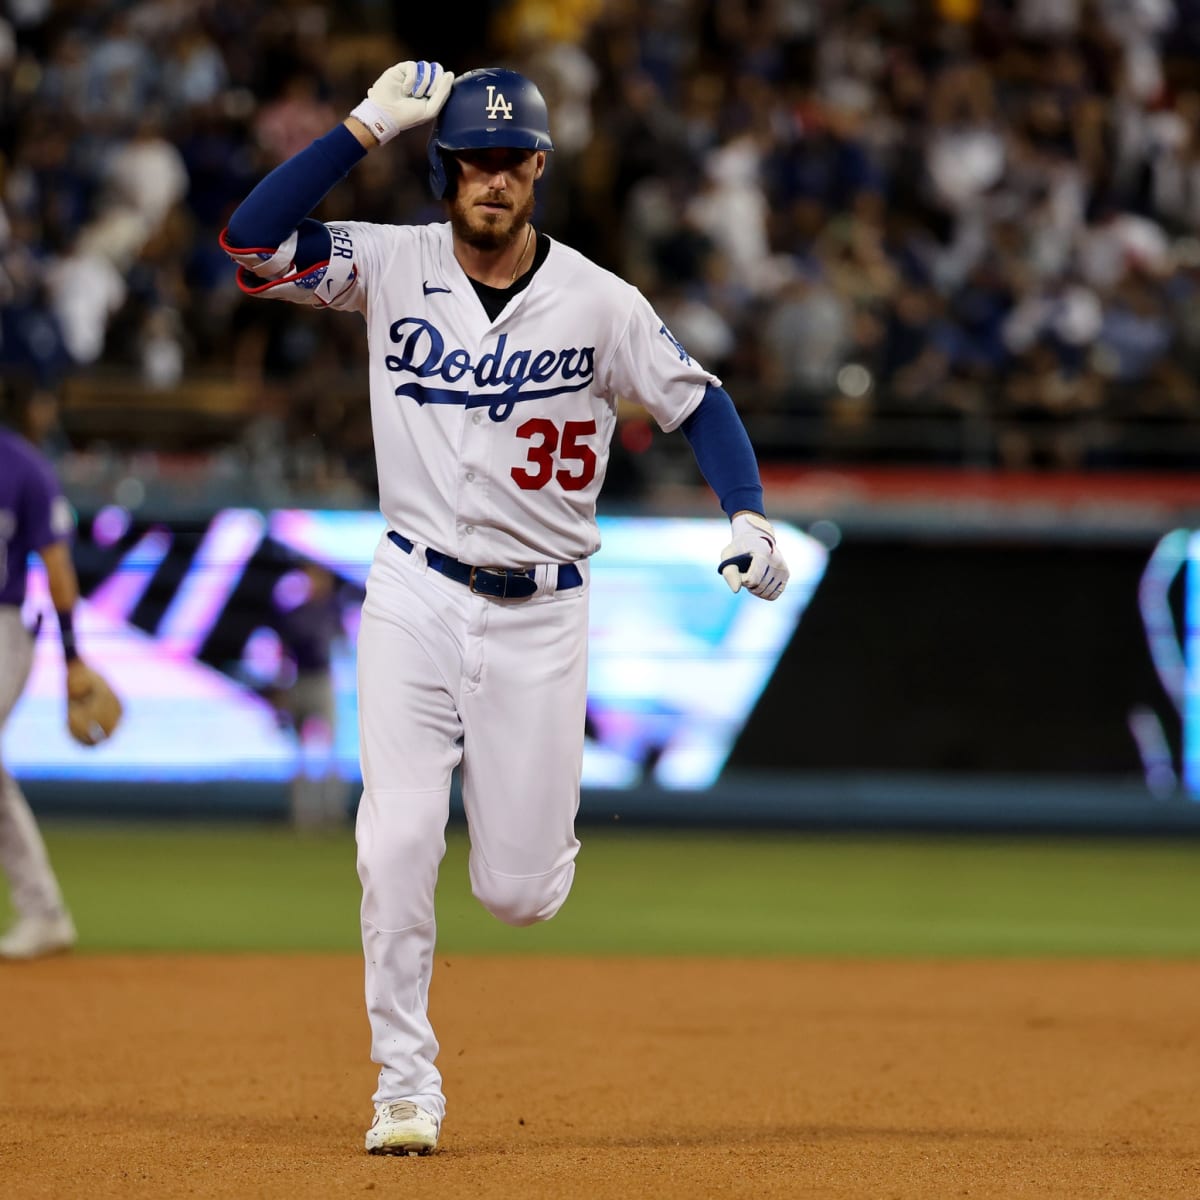 Dodgers News: Cody Bellinger Trying To 'Stay In The Present